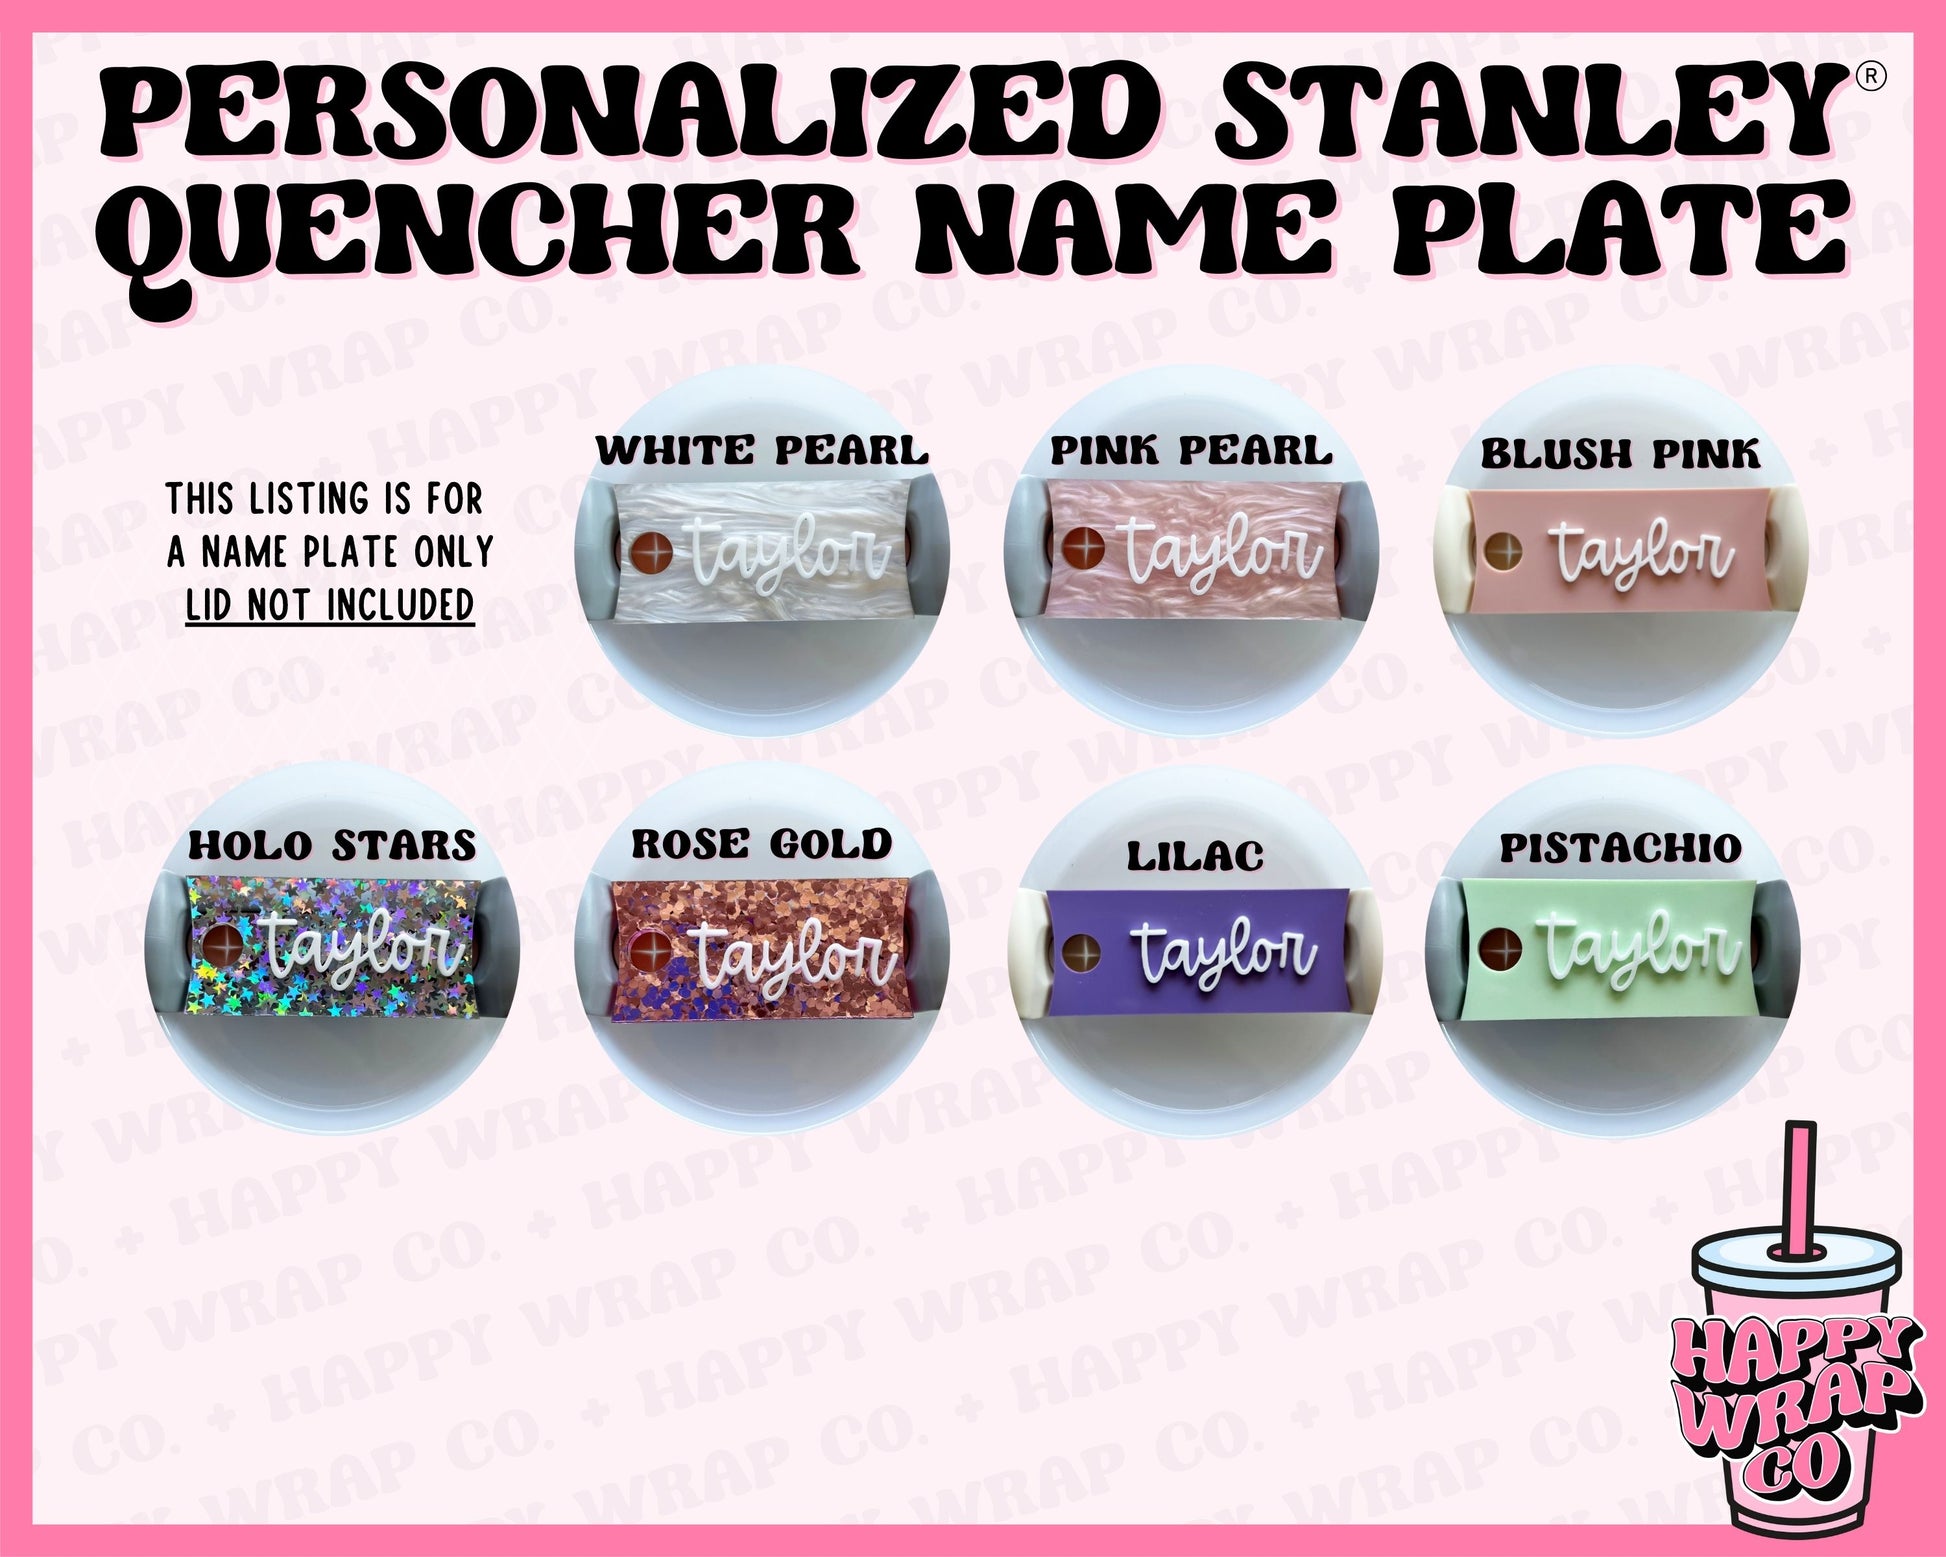 Stanley 40oz Personalized Name Plate – The KerbyGrace Collection